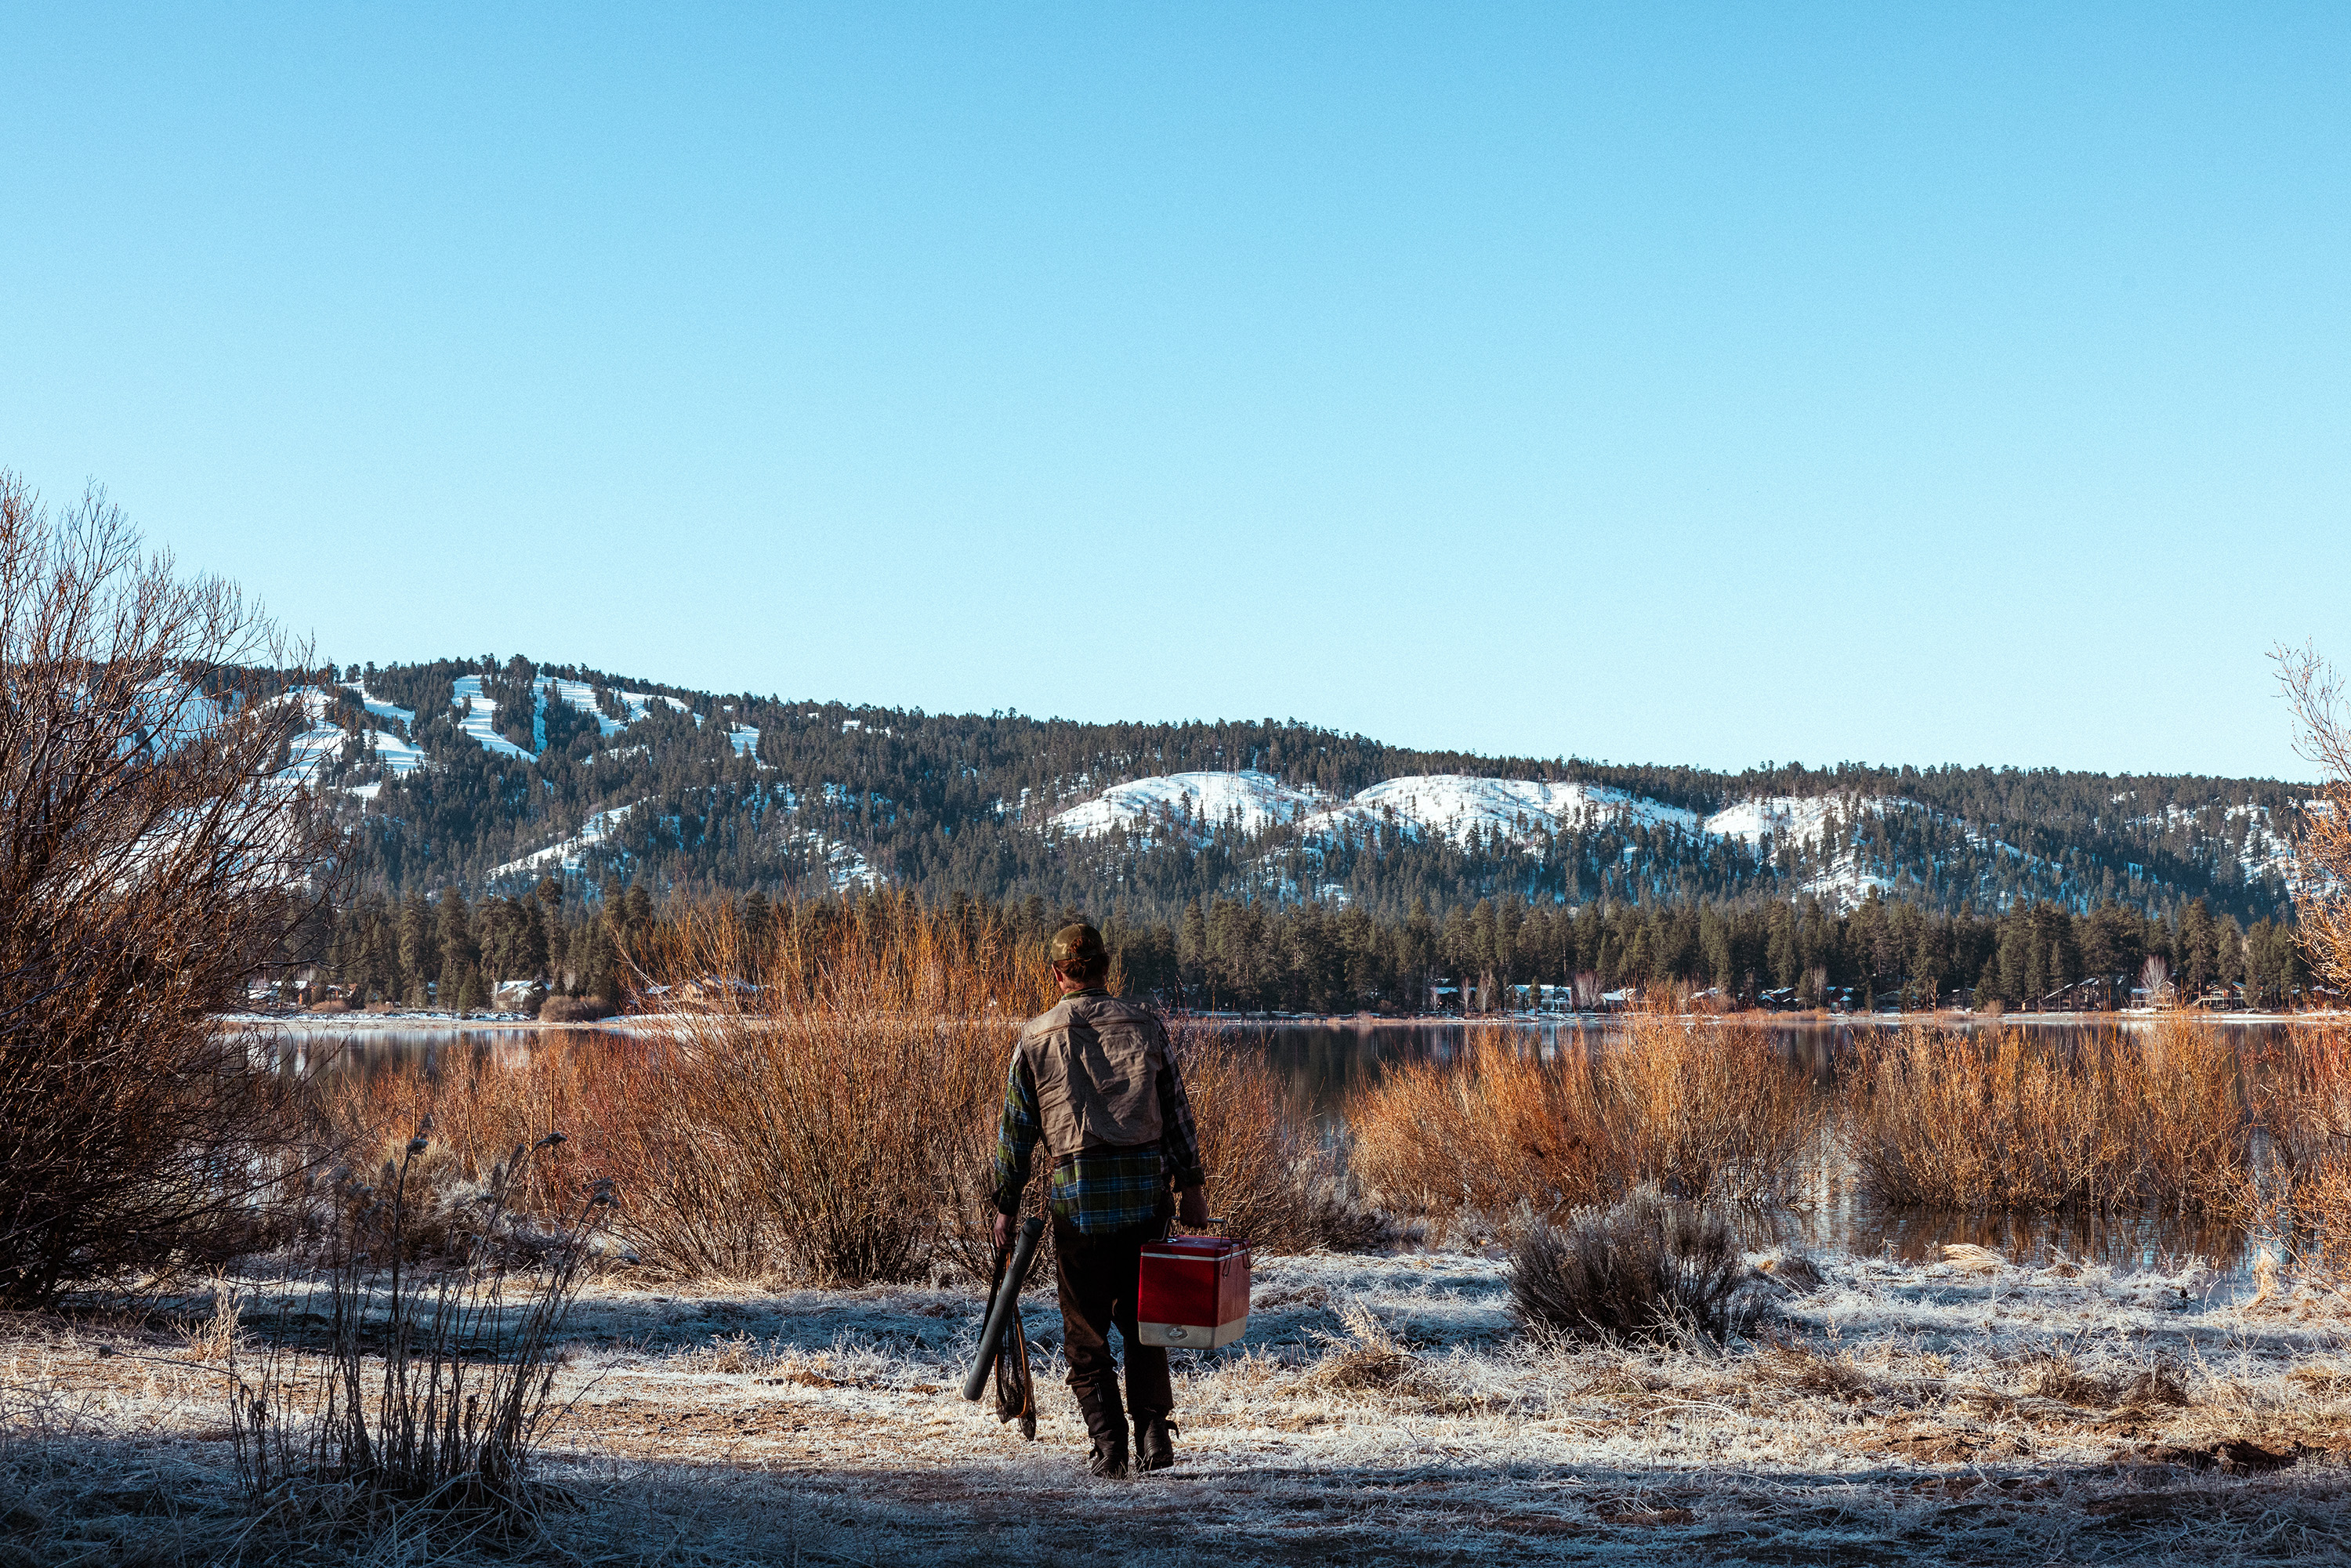 Man with his back turned, carrying a fishing rod in one hand and a red cooler in the other, admires the winter landscape and lake in front of him.